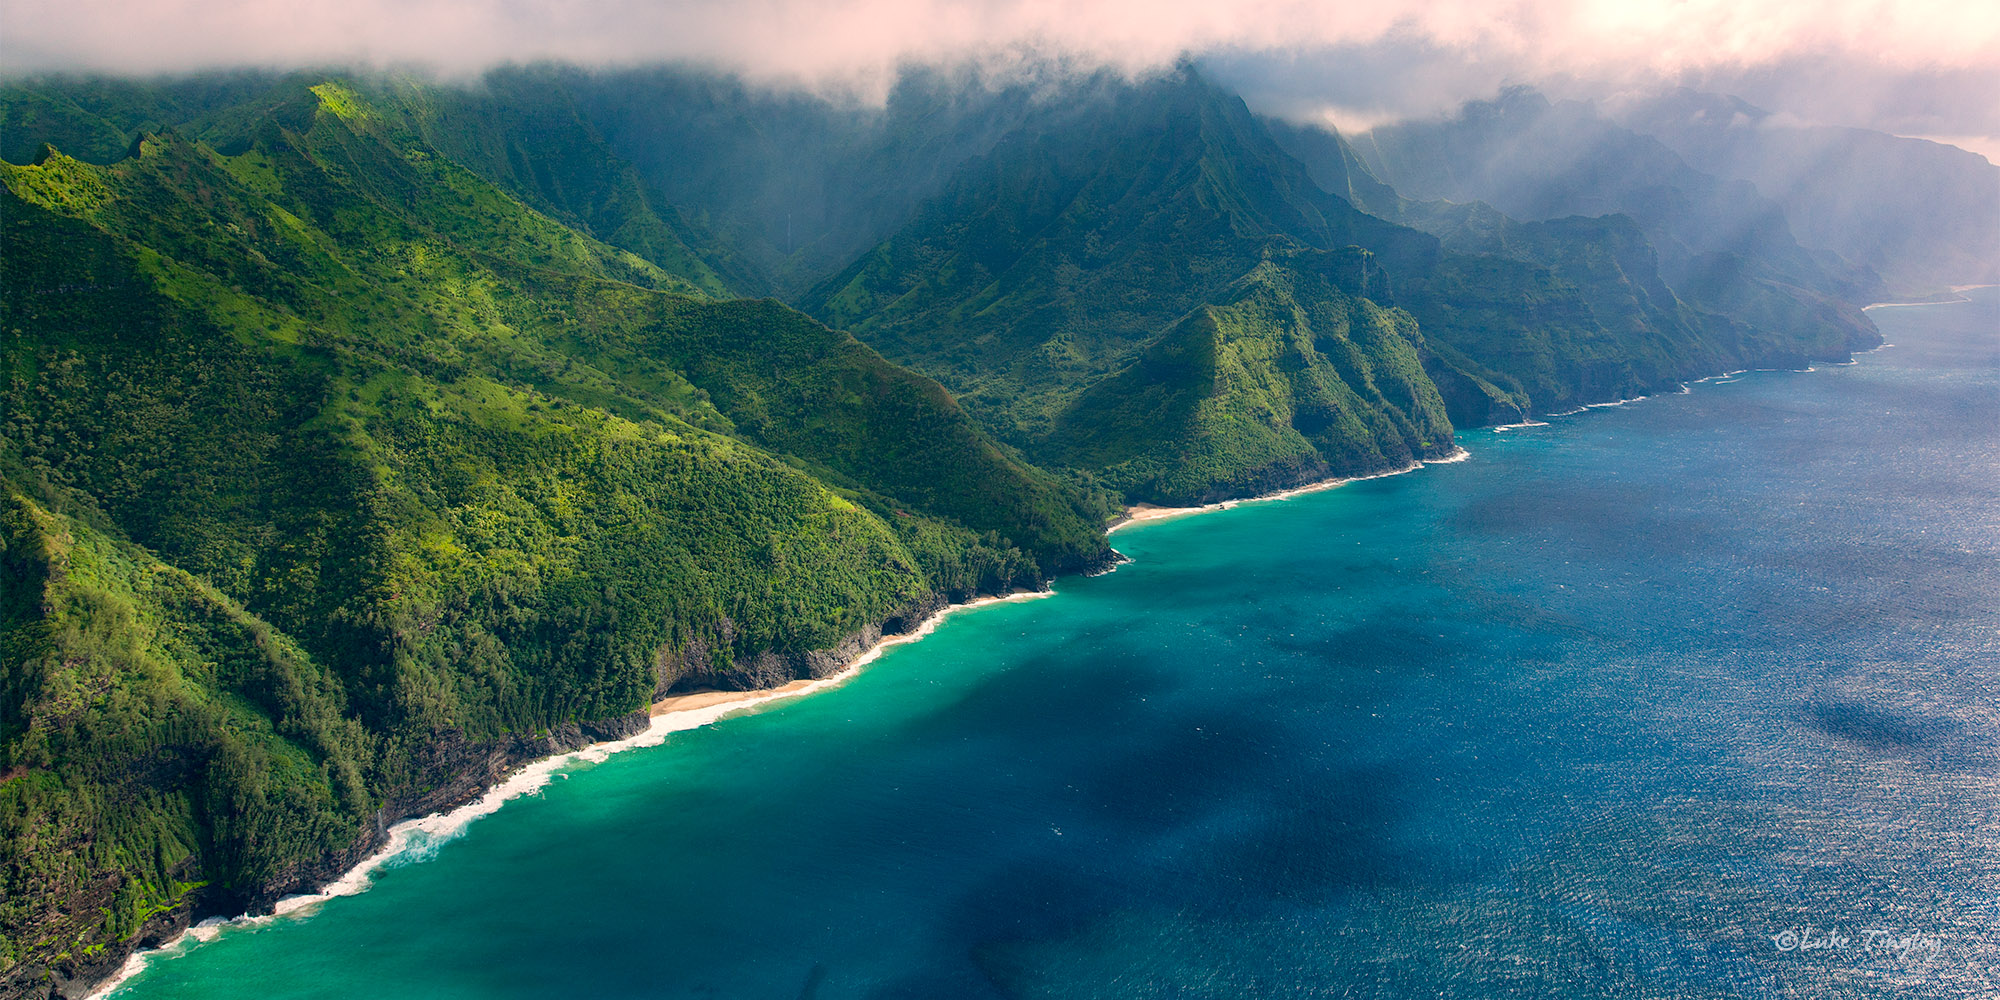 Great view of the Napali coast, taken from a doors off helicopter ride.